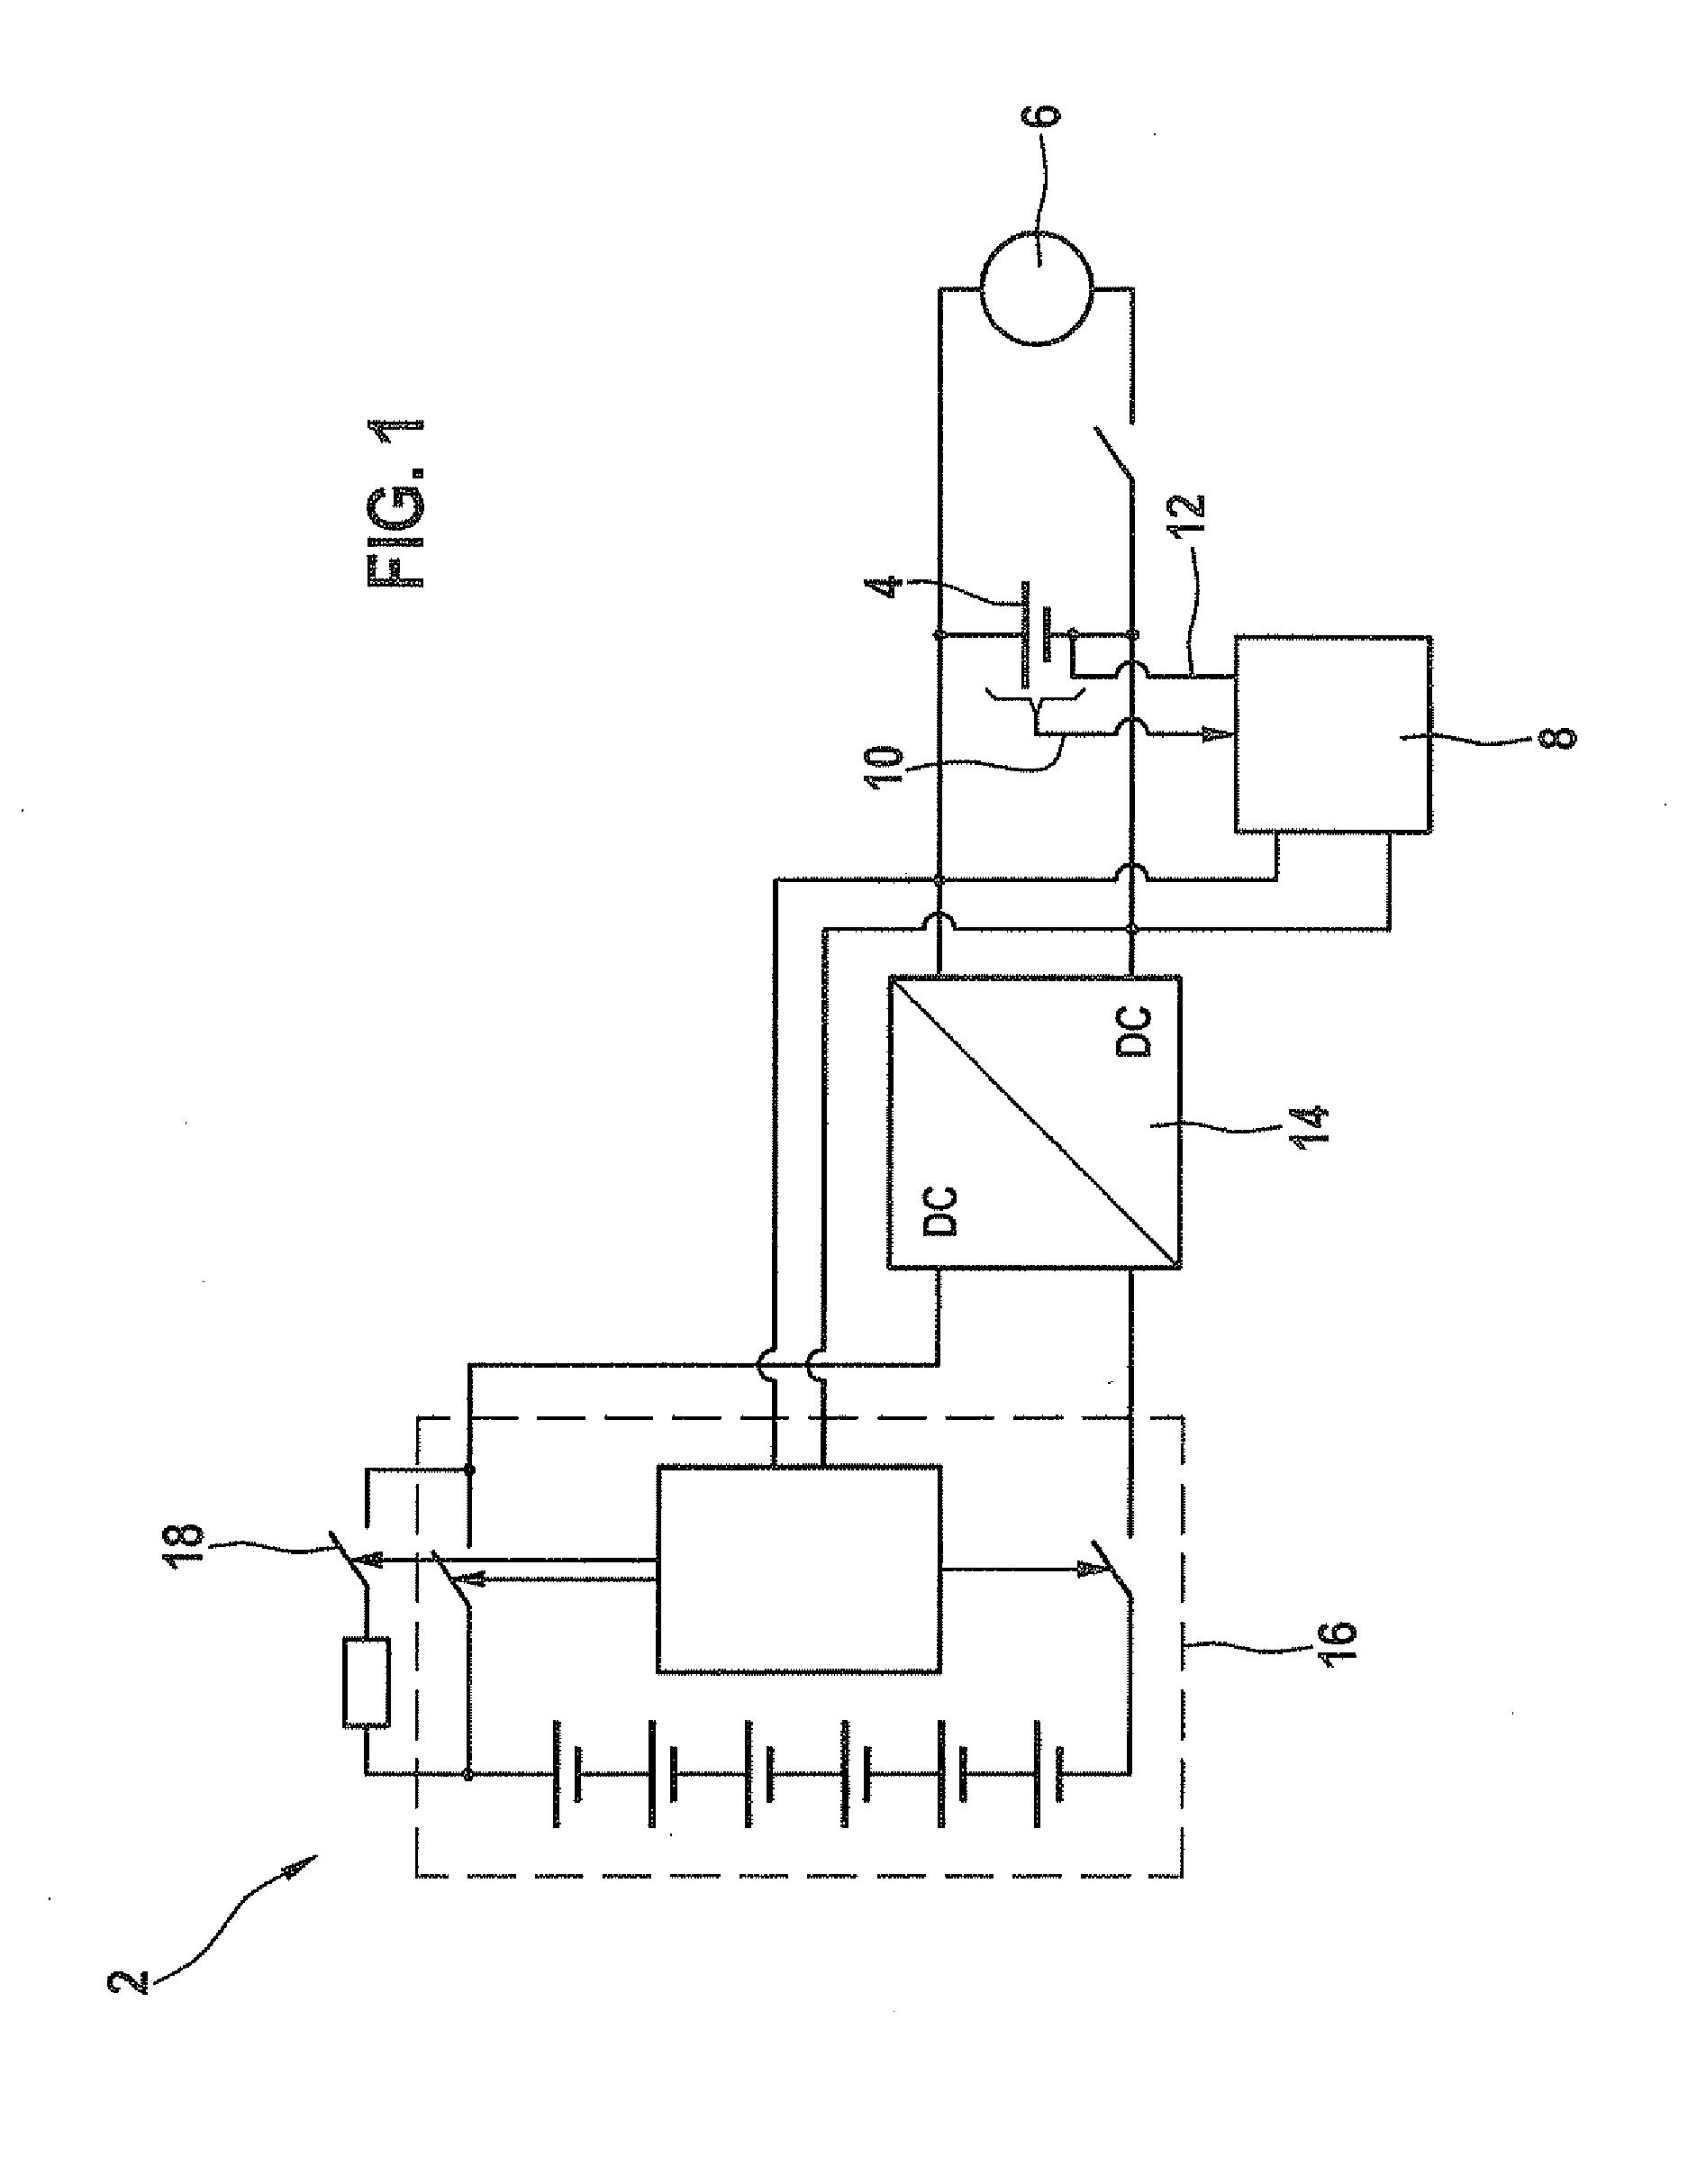 Circuit for operating an auxiliary unit for starting internal combustion engines